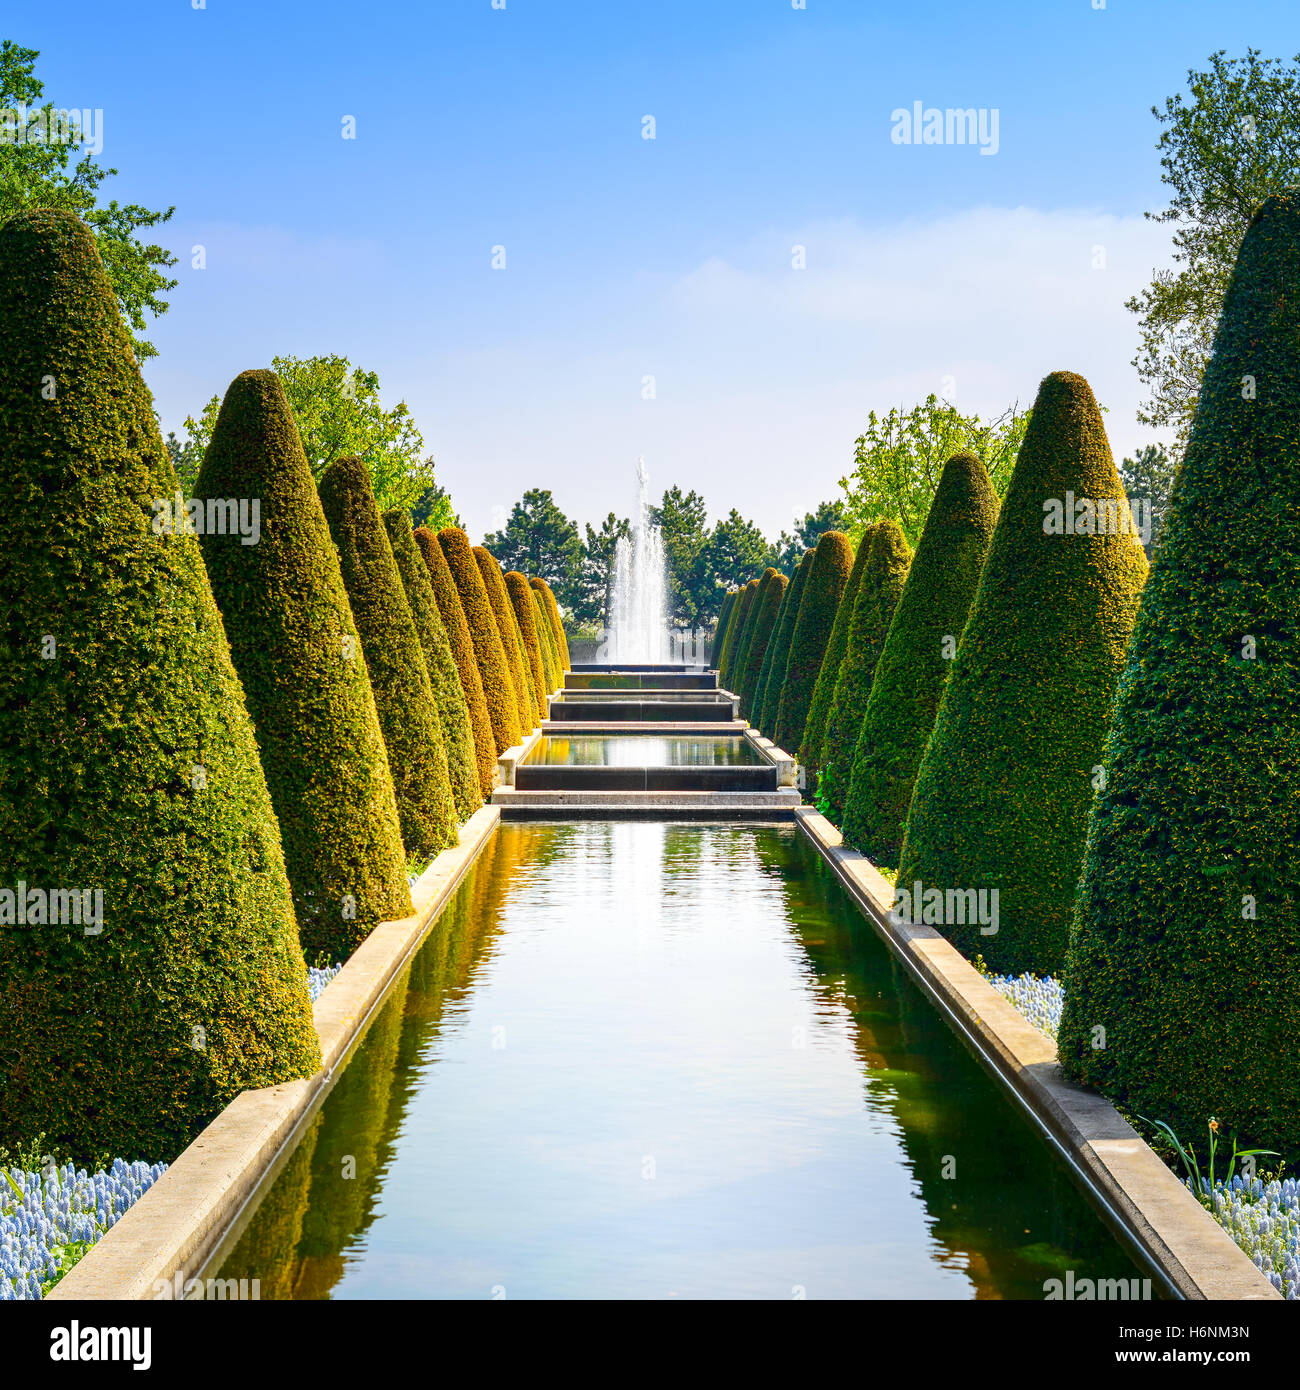 Garden in Keukenhof, conical hedges lines, water pool and fountain. Netherlands, Europe. Stock Photo